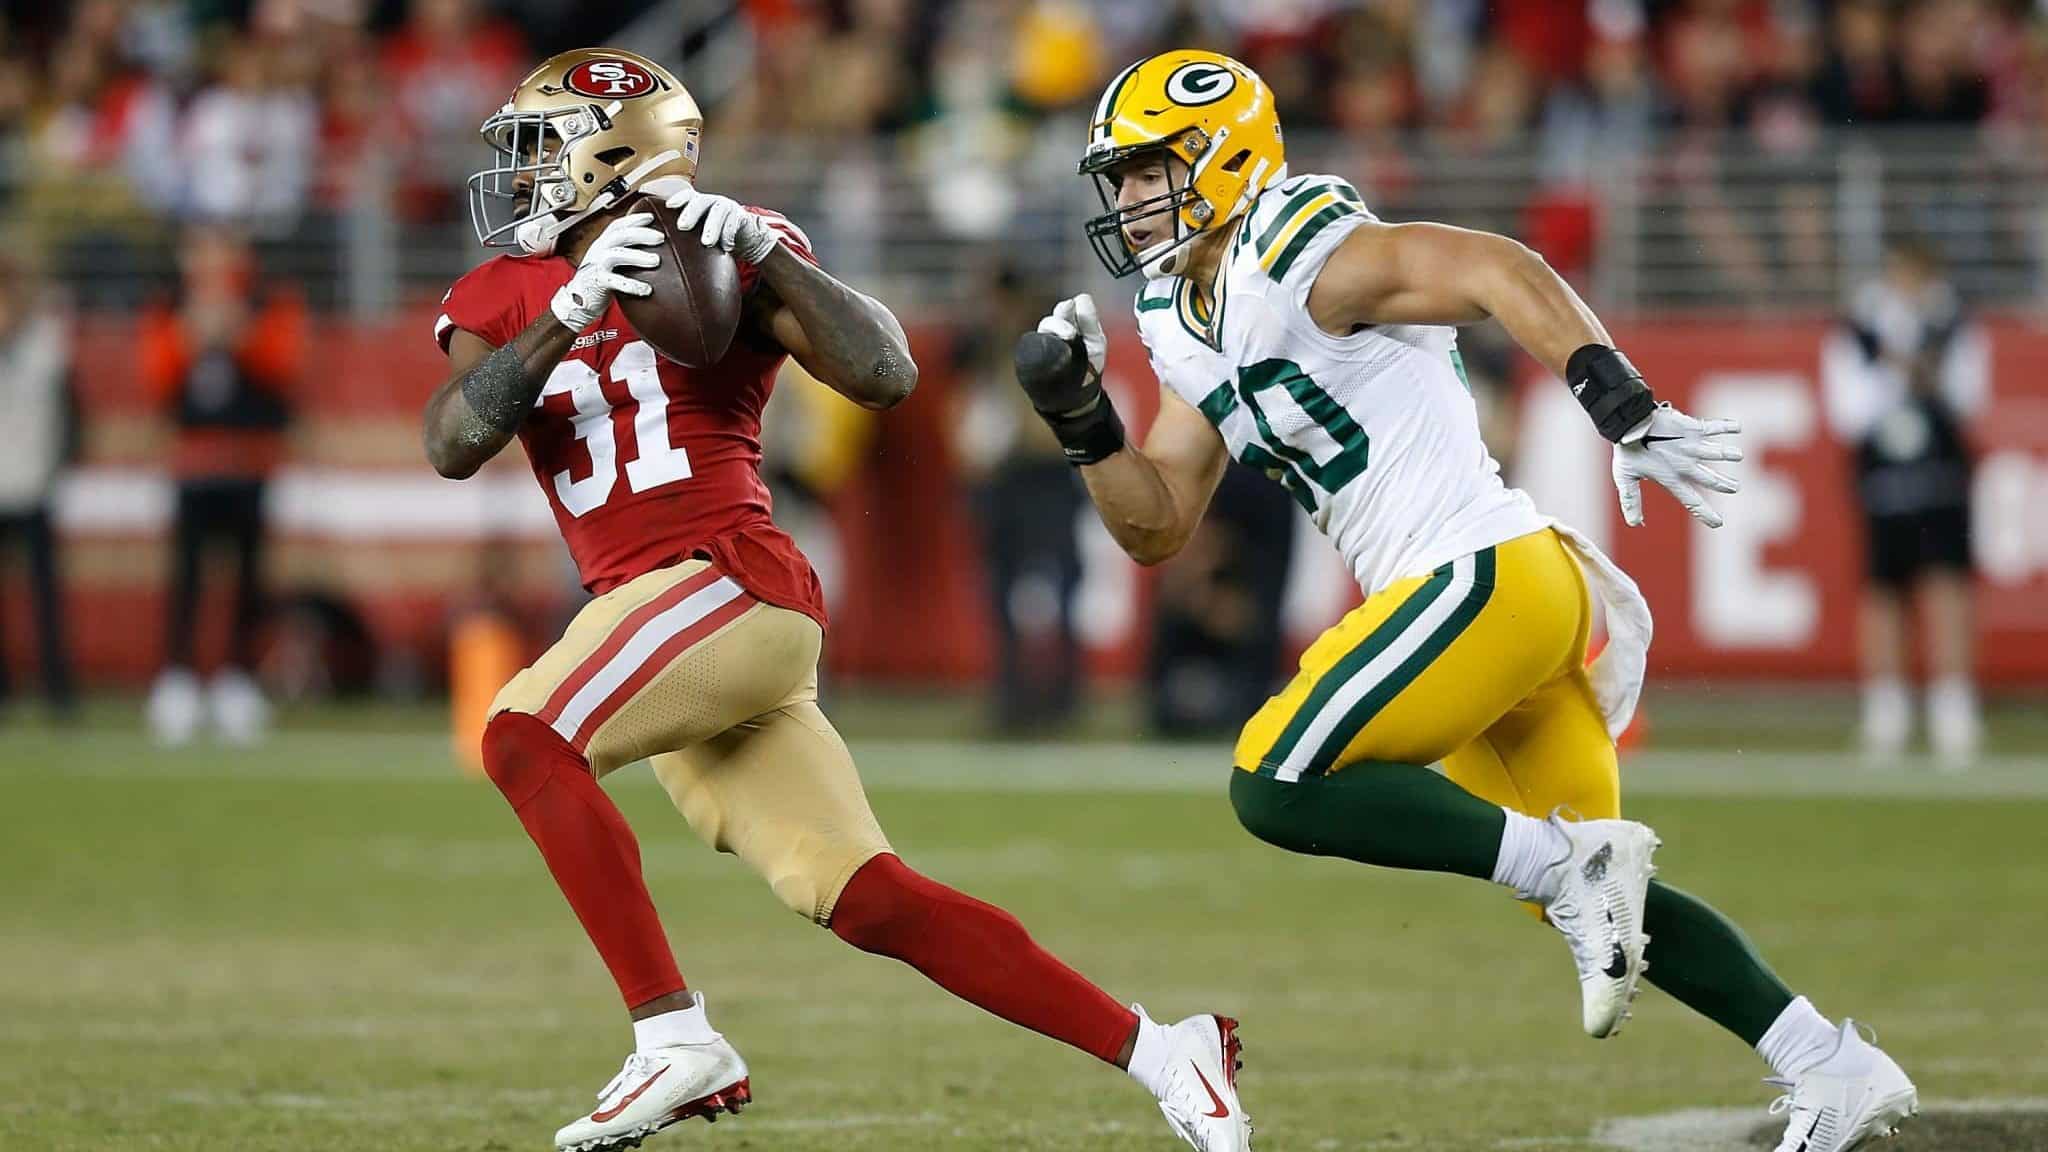 SANTA CLARA, CALIFORNIA - NOVEMBER 24: Raheem Mostert #31 of the San Francisco 49ers runs with the ball after making a catch in the fourth quarter against the Green Bay Packers at Levi's Stadium on November 24, 2019 in Santa Clara, California.